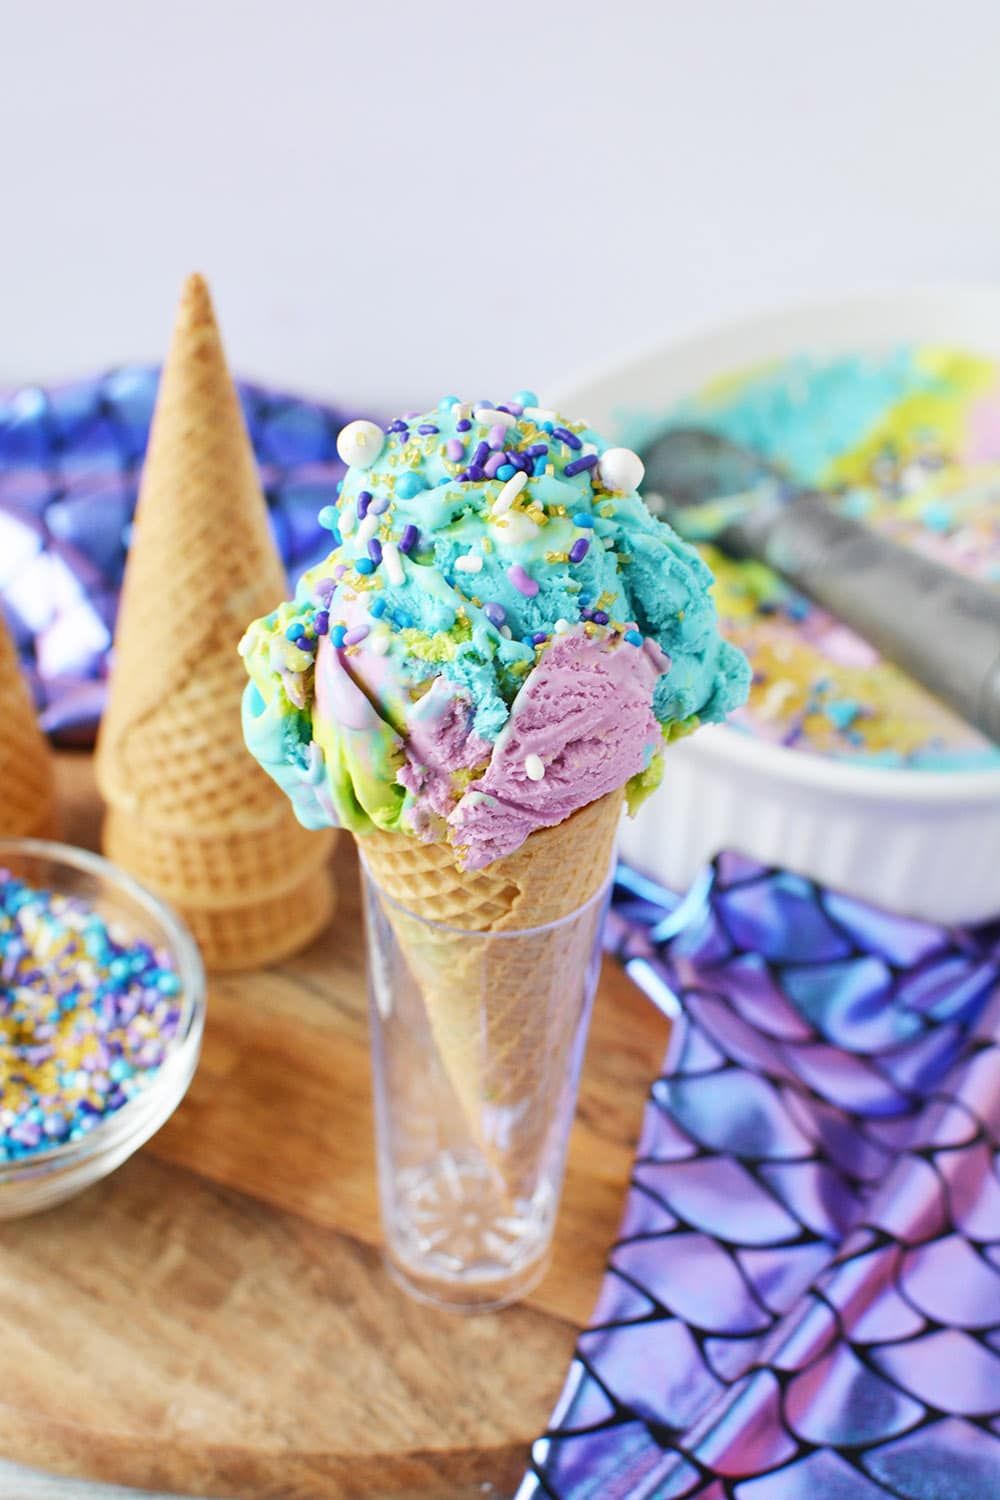 Mermaid ice cream in a cone in a holder on table